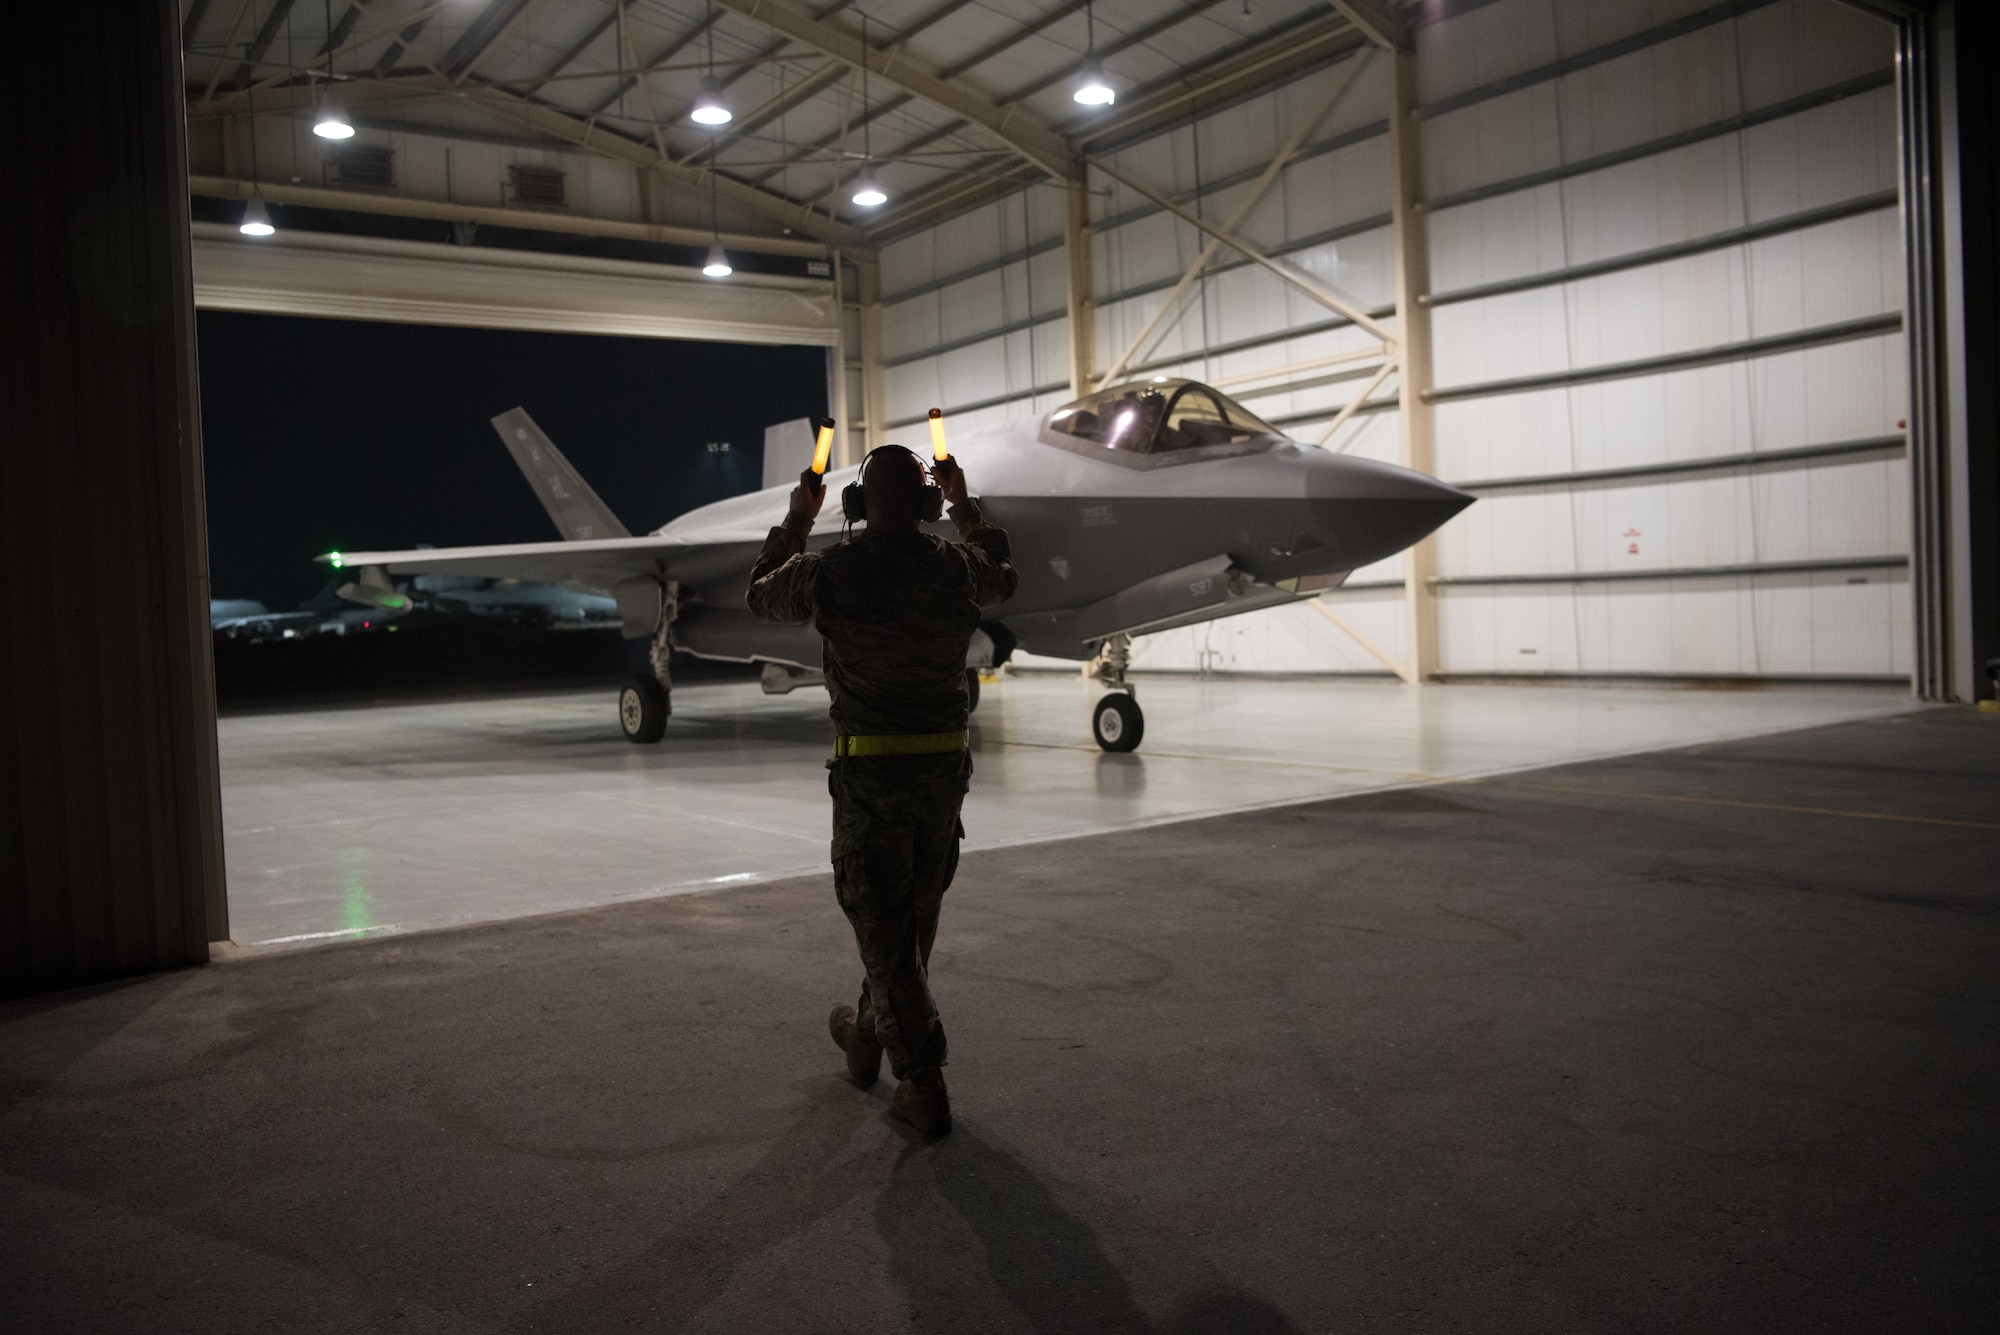 A U.S. Air Force F-35A Lightning II aircraft, assigned to the 4th Expeditionary Fighter Squadron, is marshalled from the hangar Sept. 10, 2019, at Al Dhafra Air Base, United Arab Emirates. The F-35A conducted a Coalition and Iraqi Counter-Terrorism Service air strike in the Salah ad Din Province, Iraq, Sept. 10, in support of Iraqi ground force clearing operations.  (U.S. Air Force photo by Tech. Sgt. Jocelyn A. Ford)